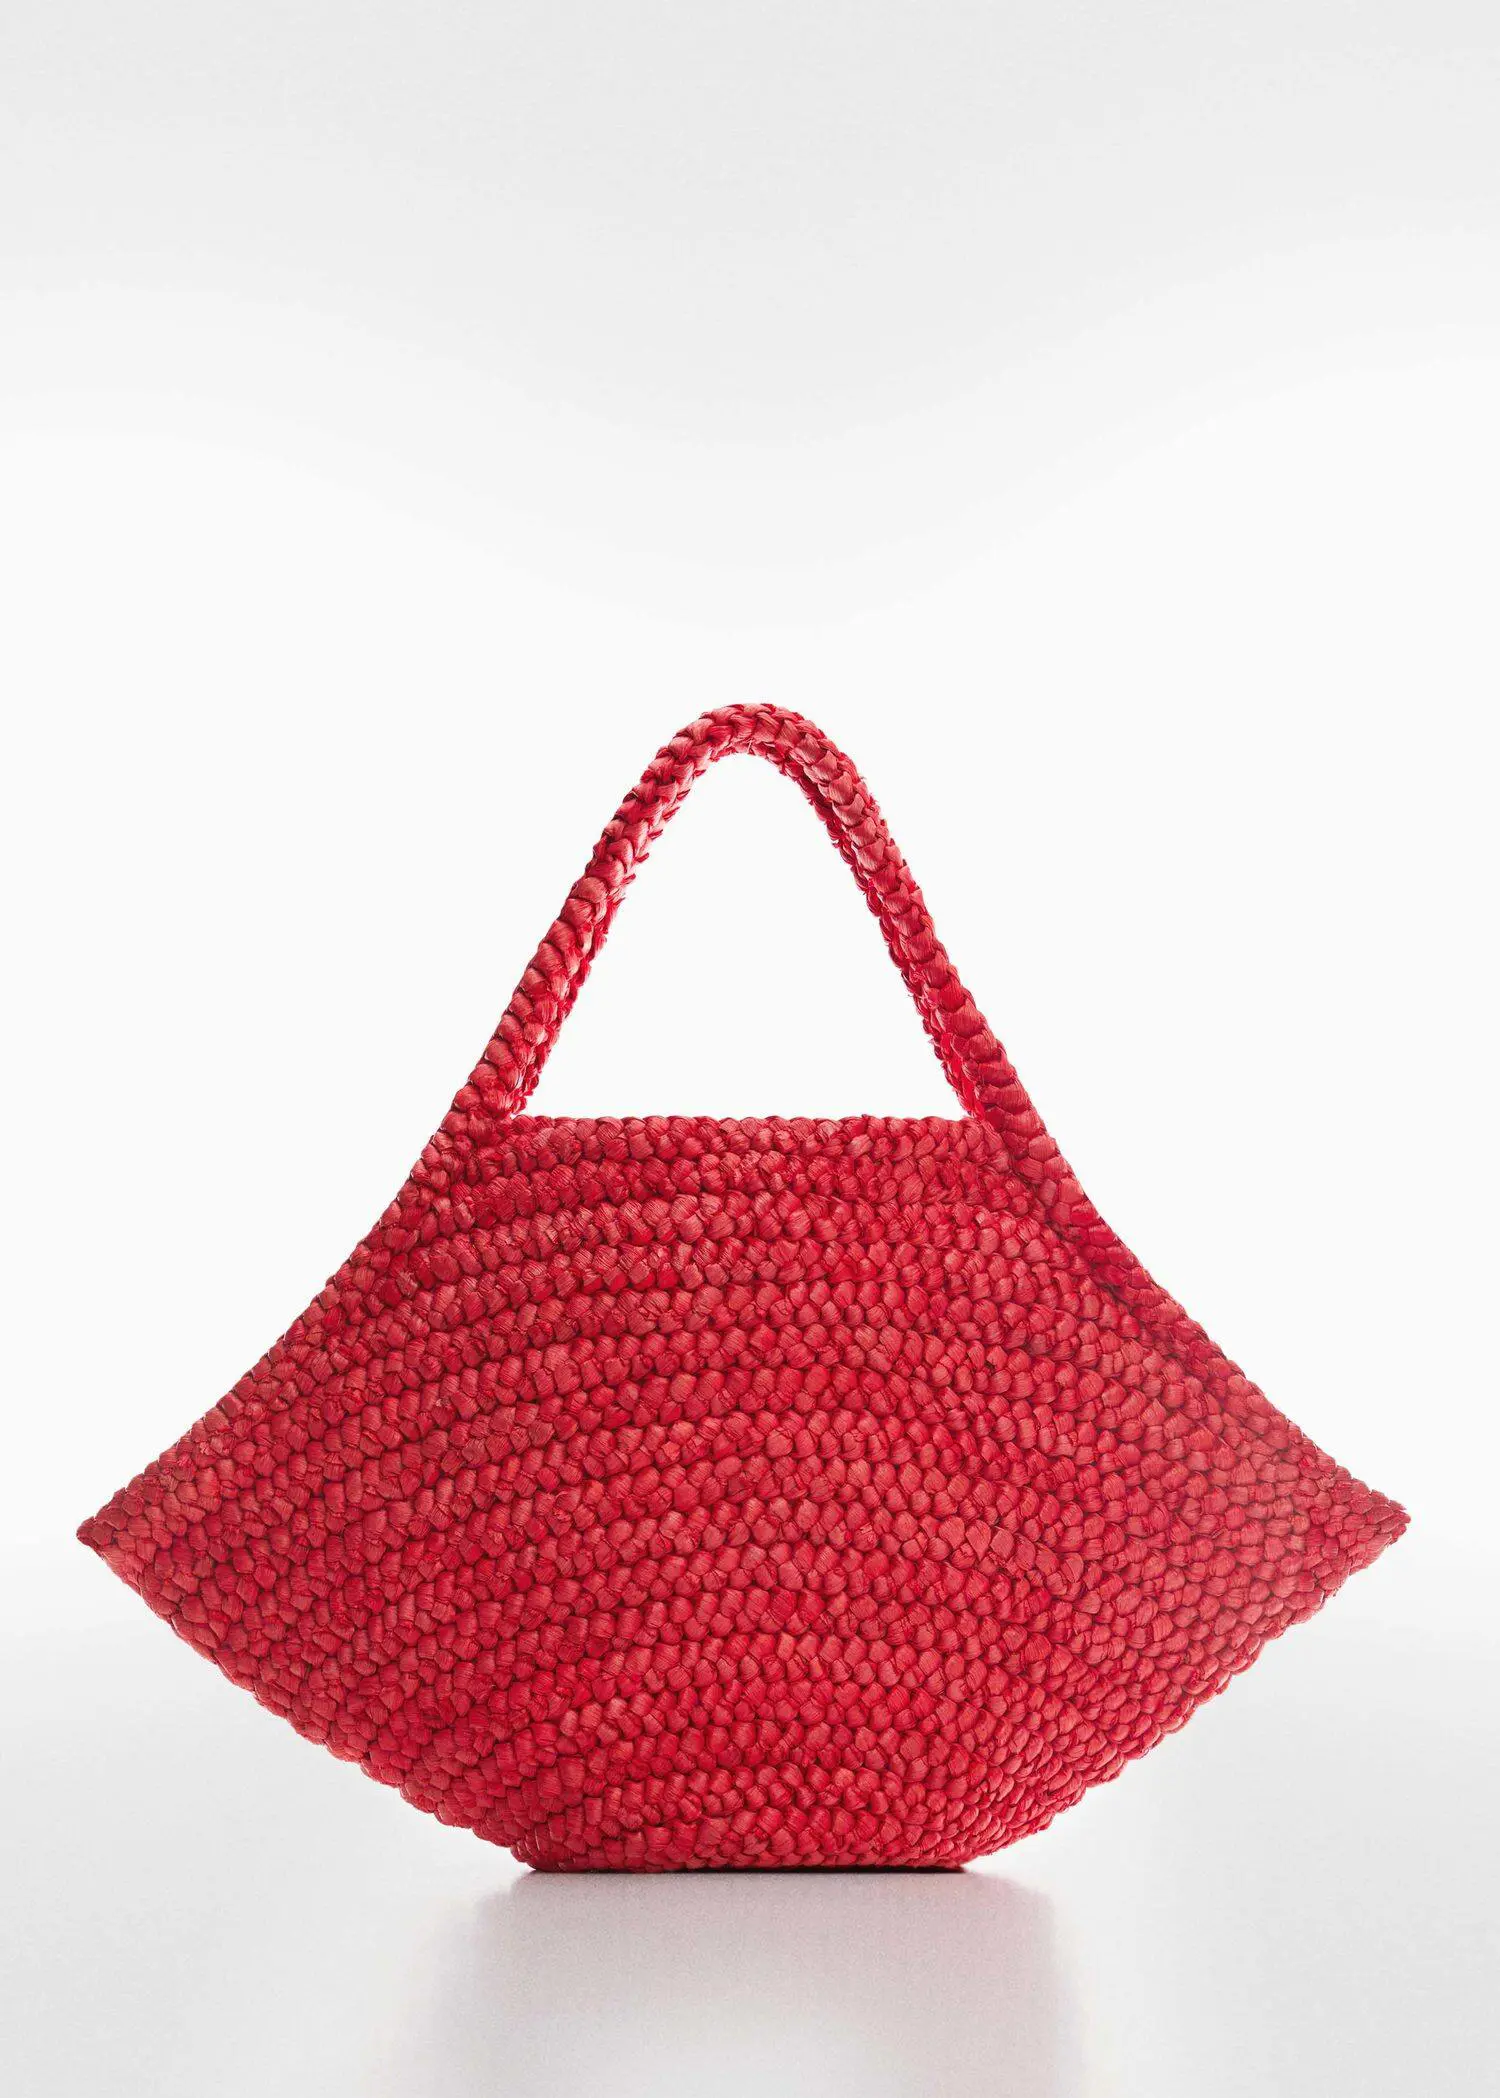 Mango Natural fiber maxi tote bag. a close up of a red bag on a white background 